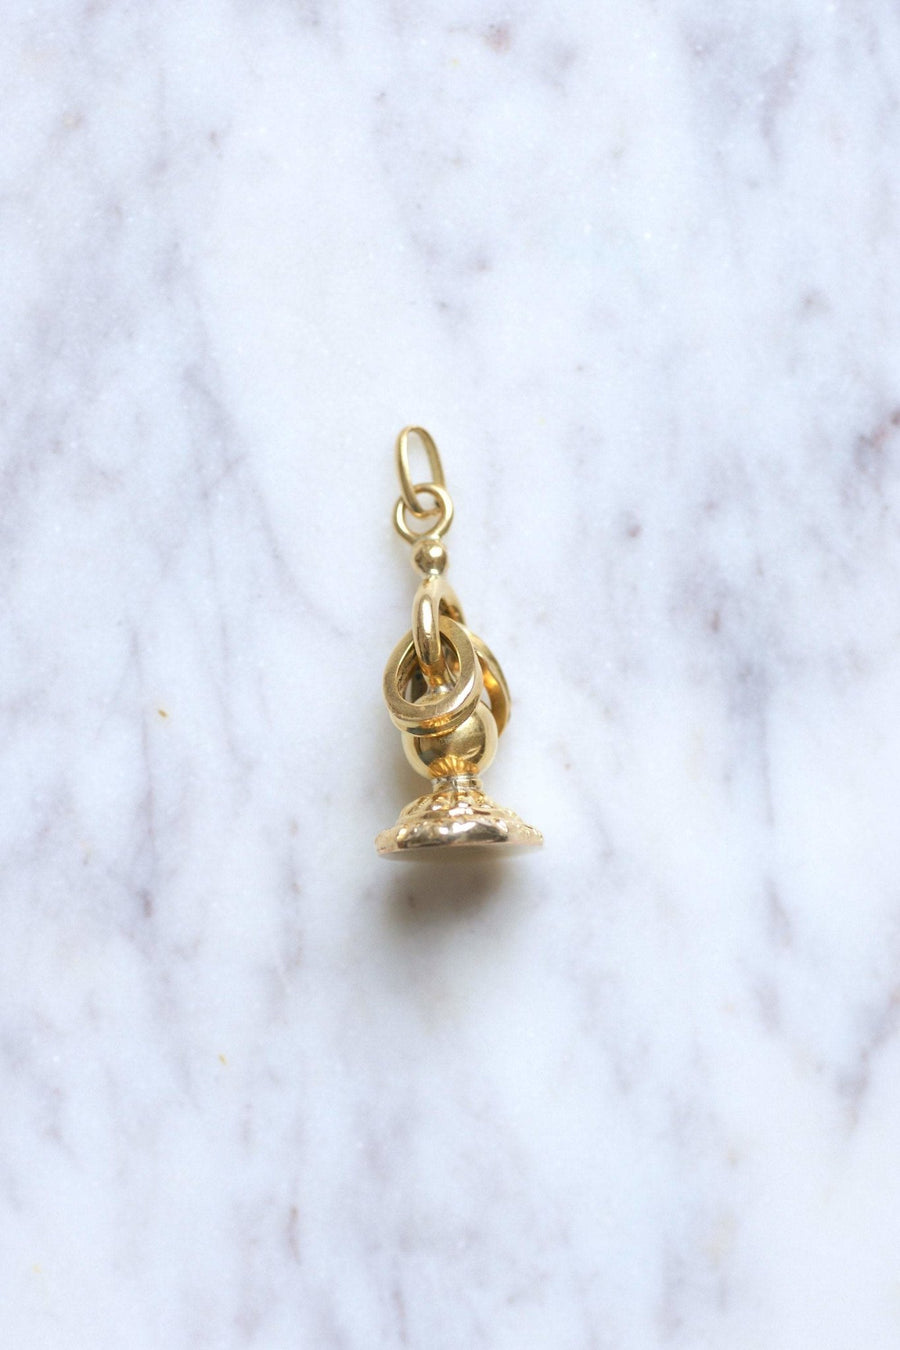 Antique Victorian Seal Pendant in Yellow Gold - Penelope Gallery